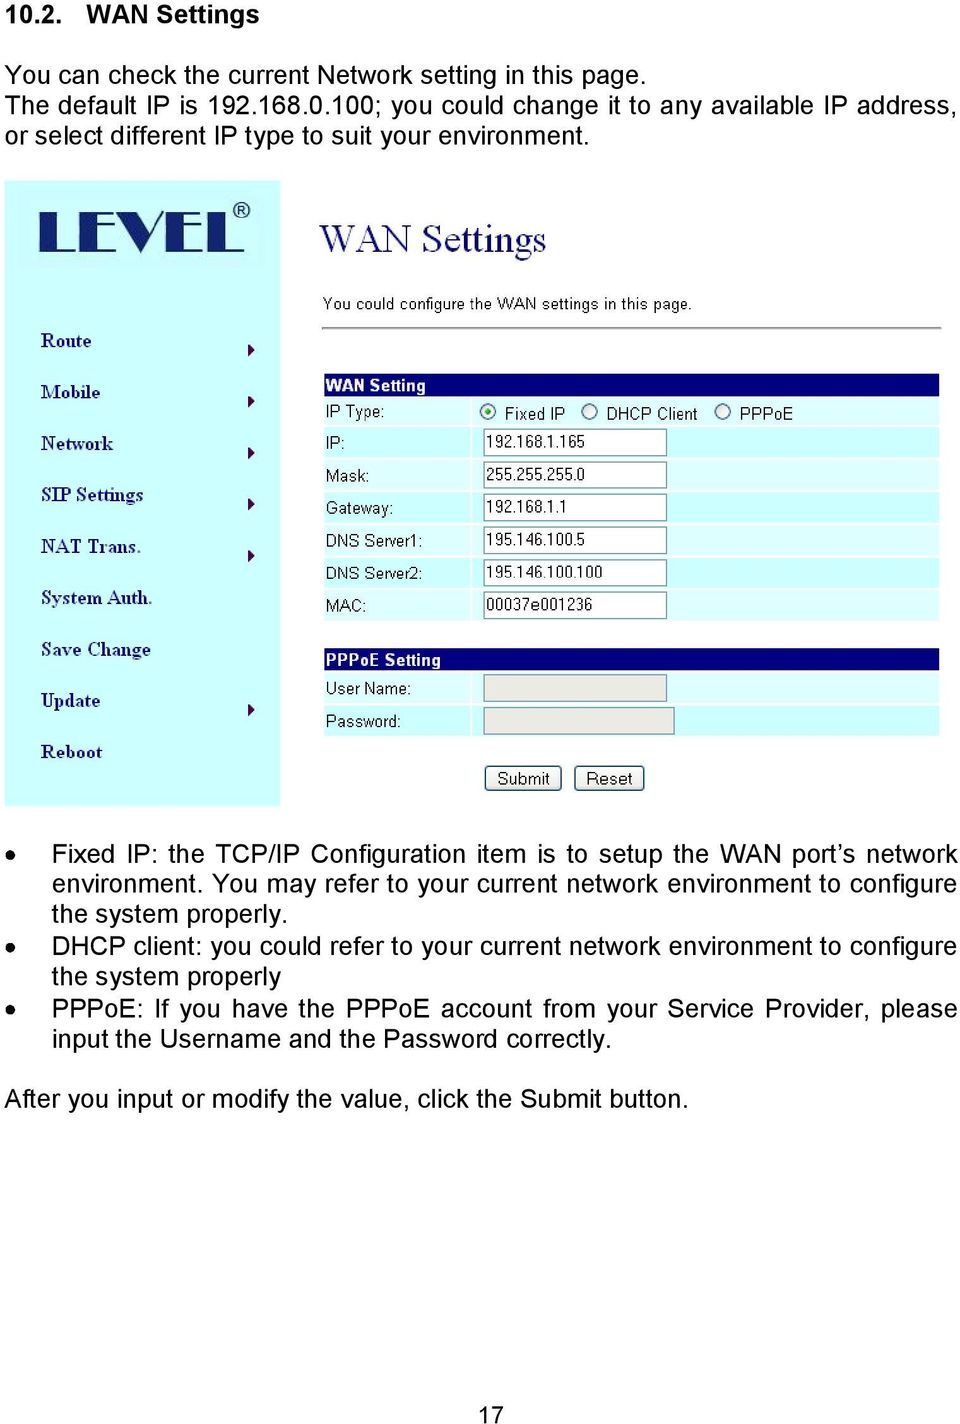 You may refer to your current network environment to configure the system properly.